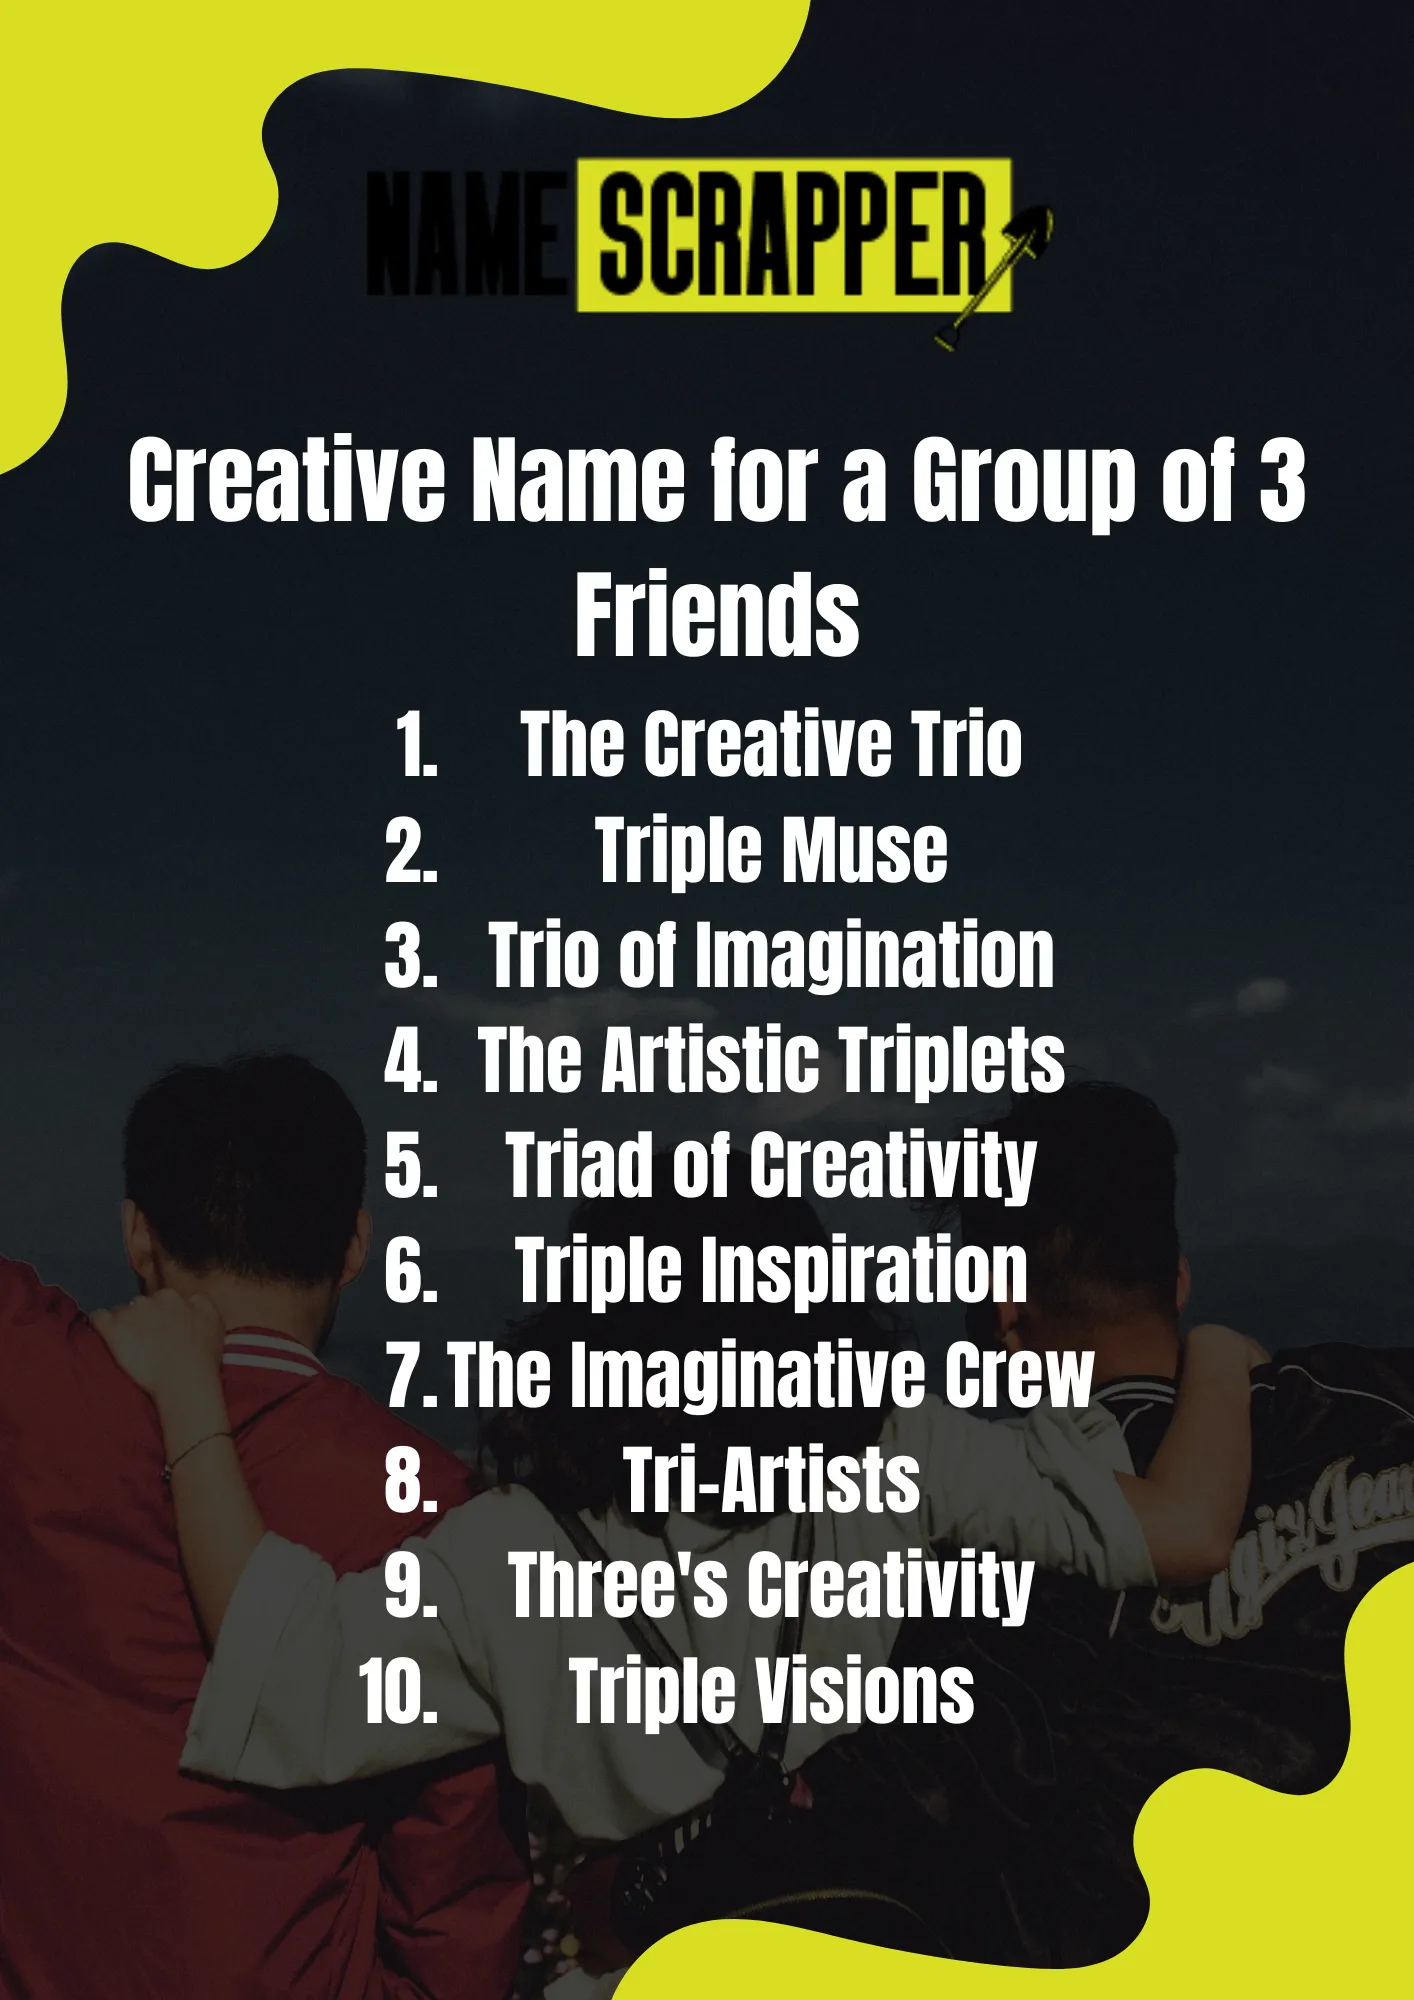 Creative Name for group of 3 friends